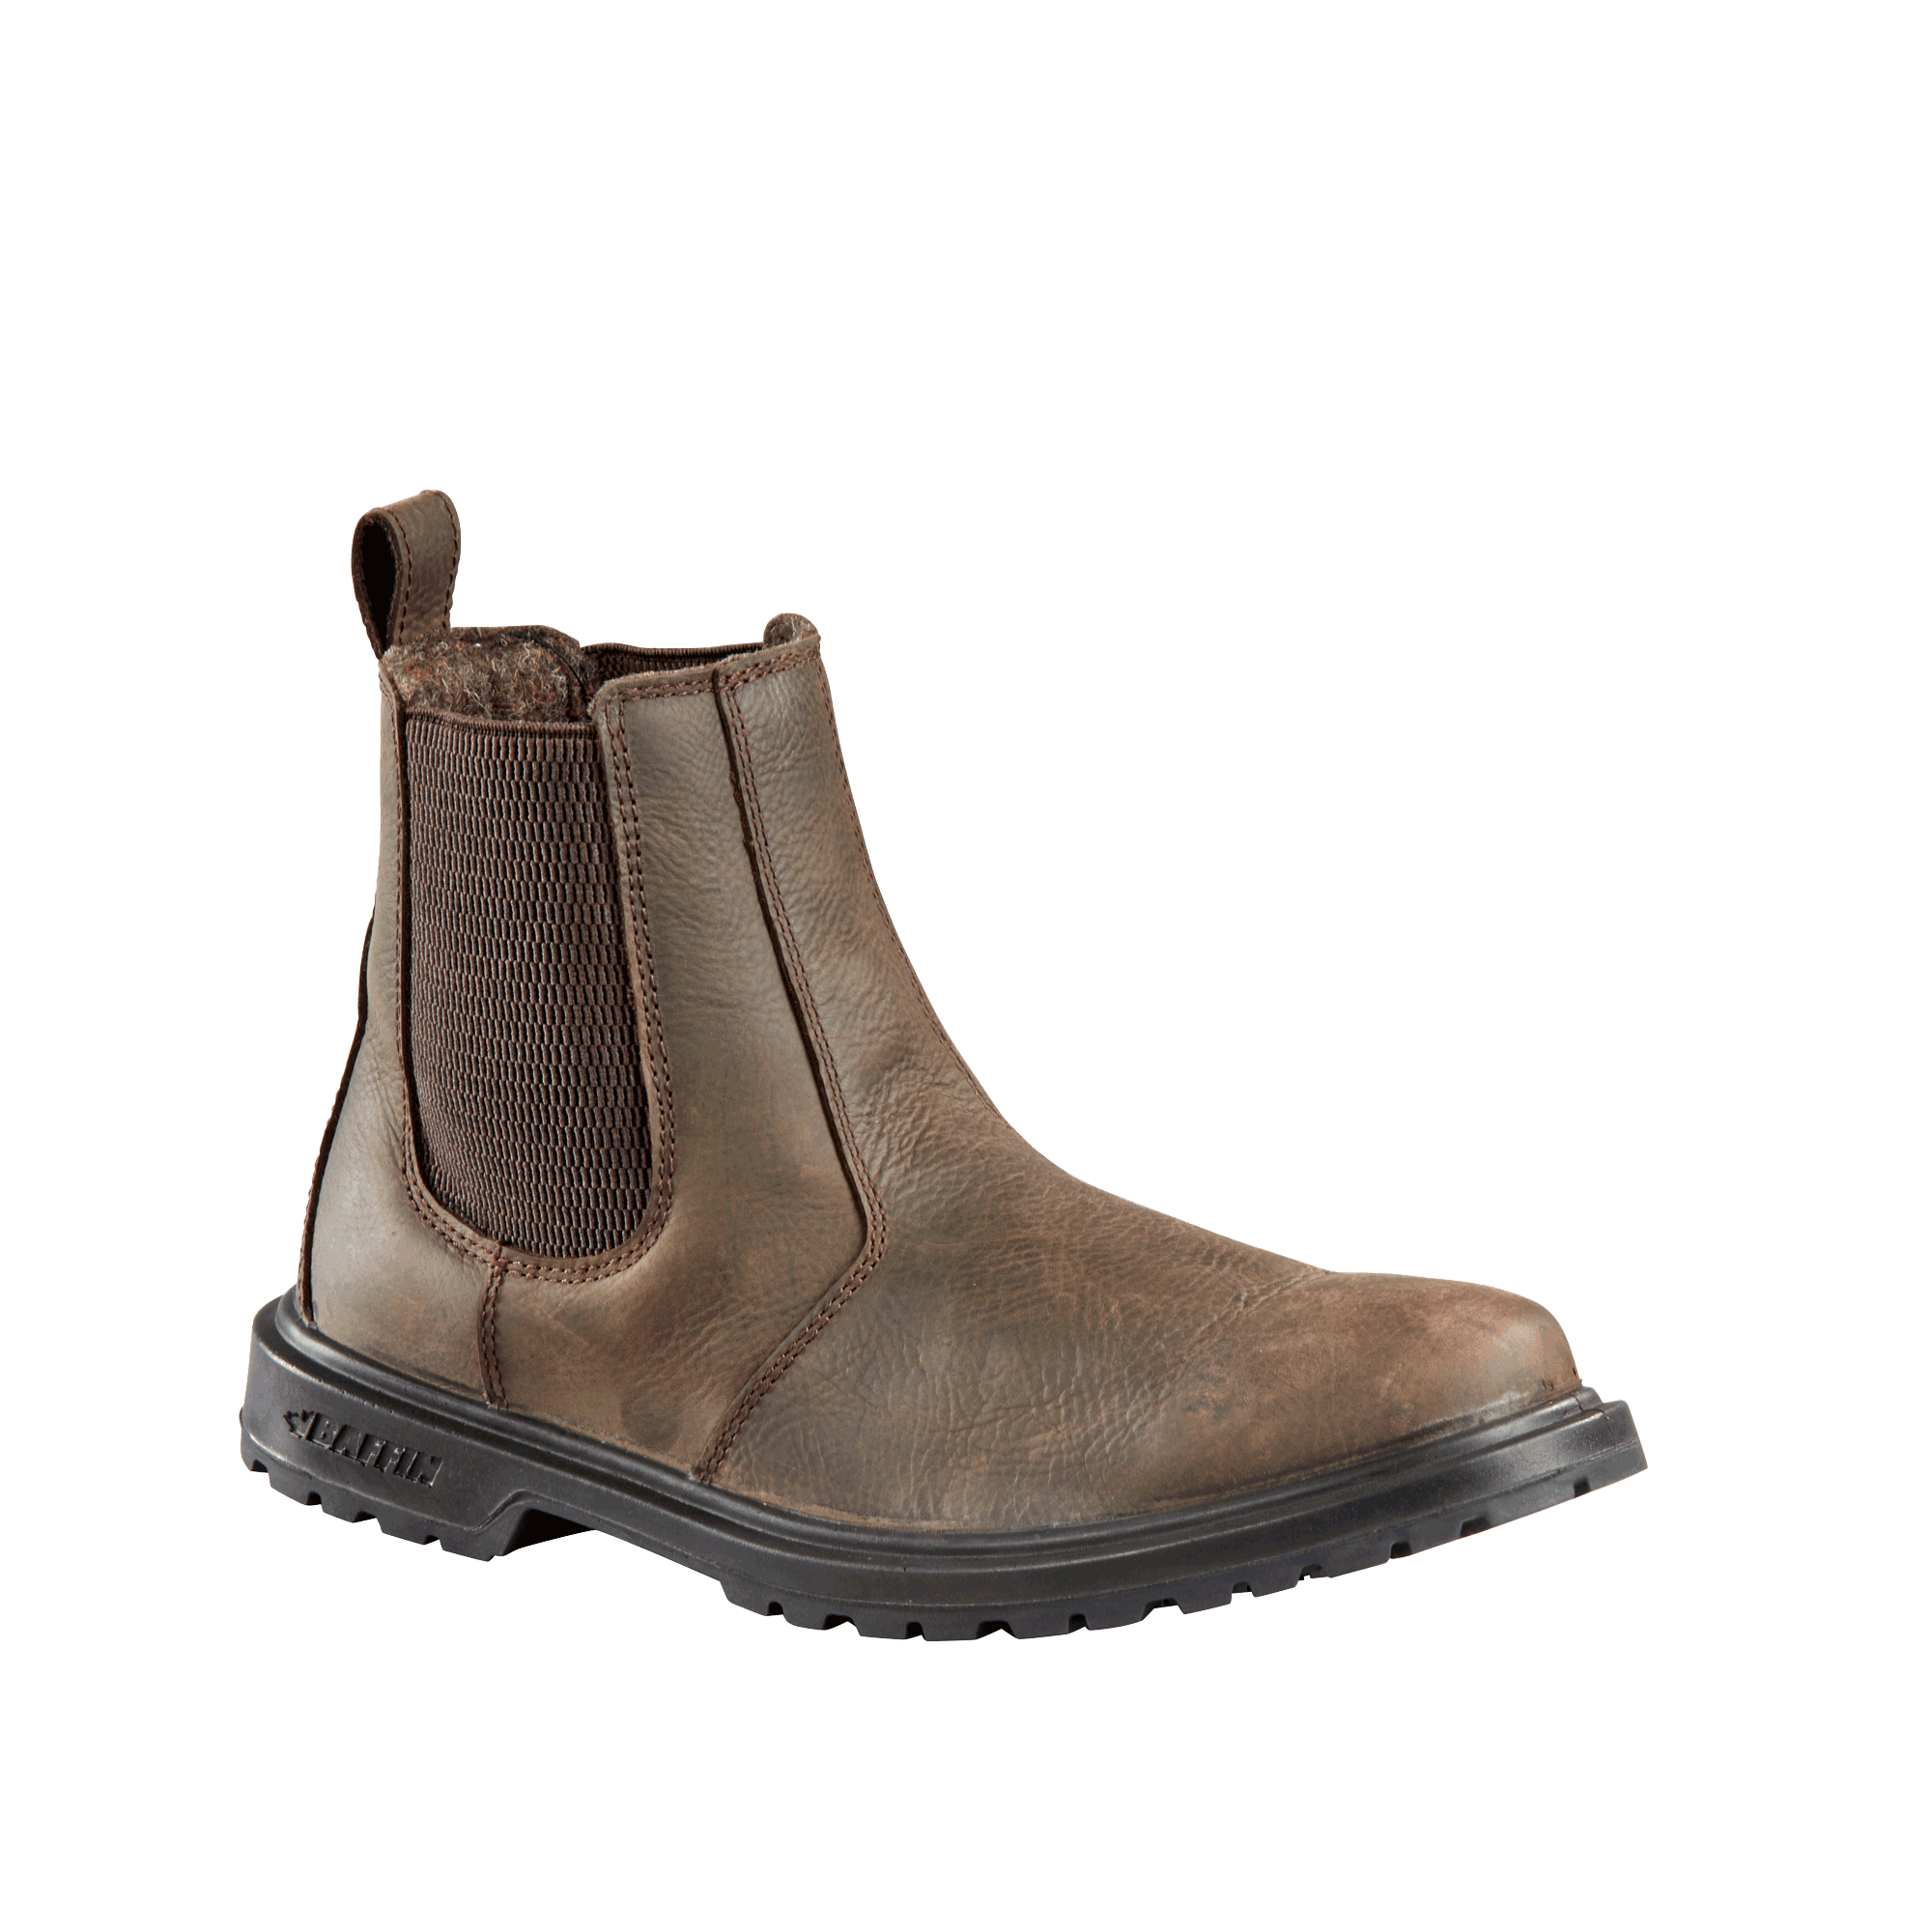 EASTERN | Men's Boot – Baffin - Born in the North '79